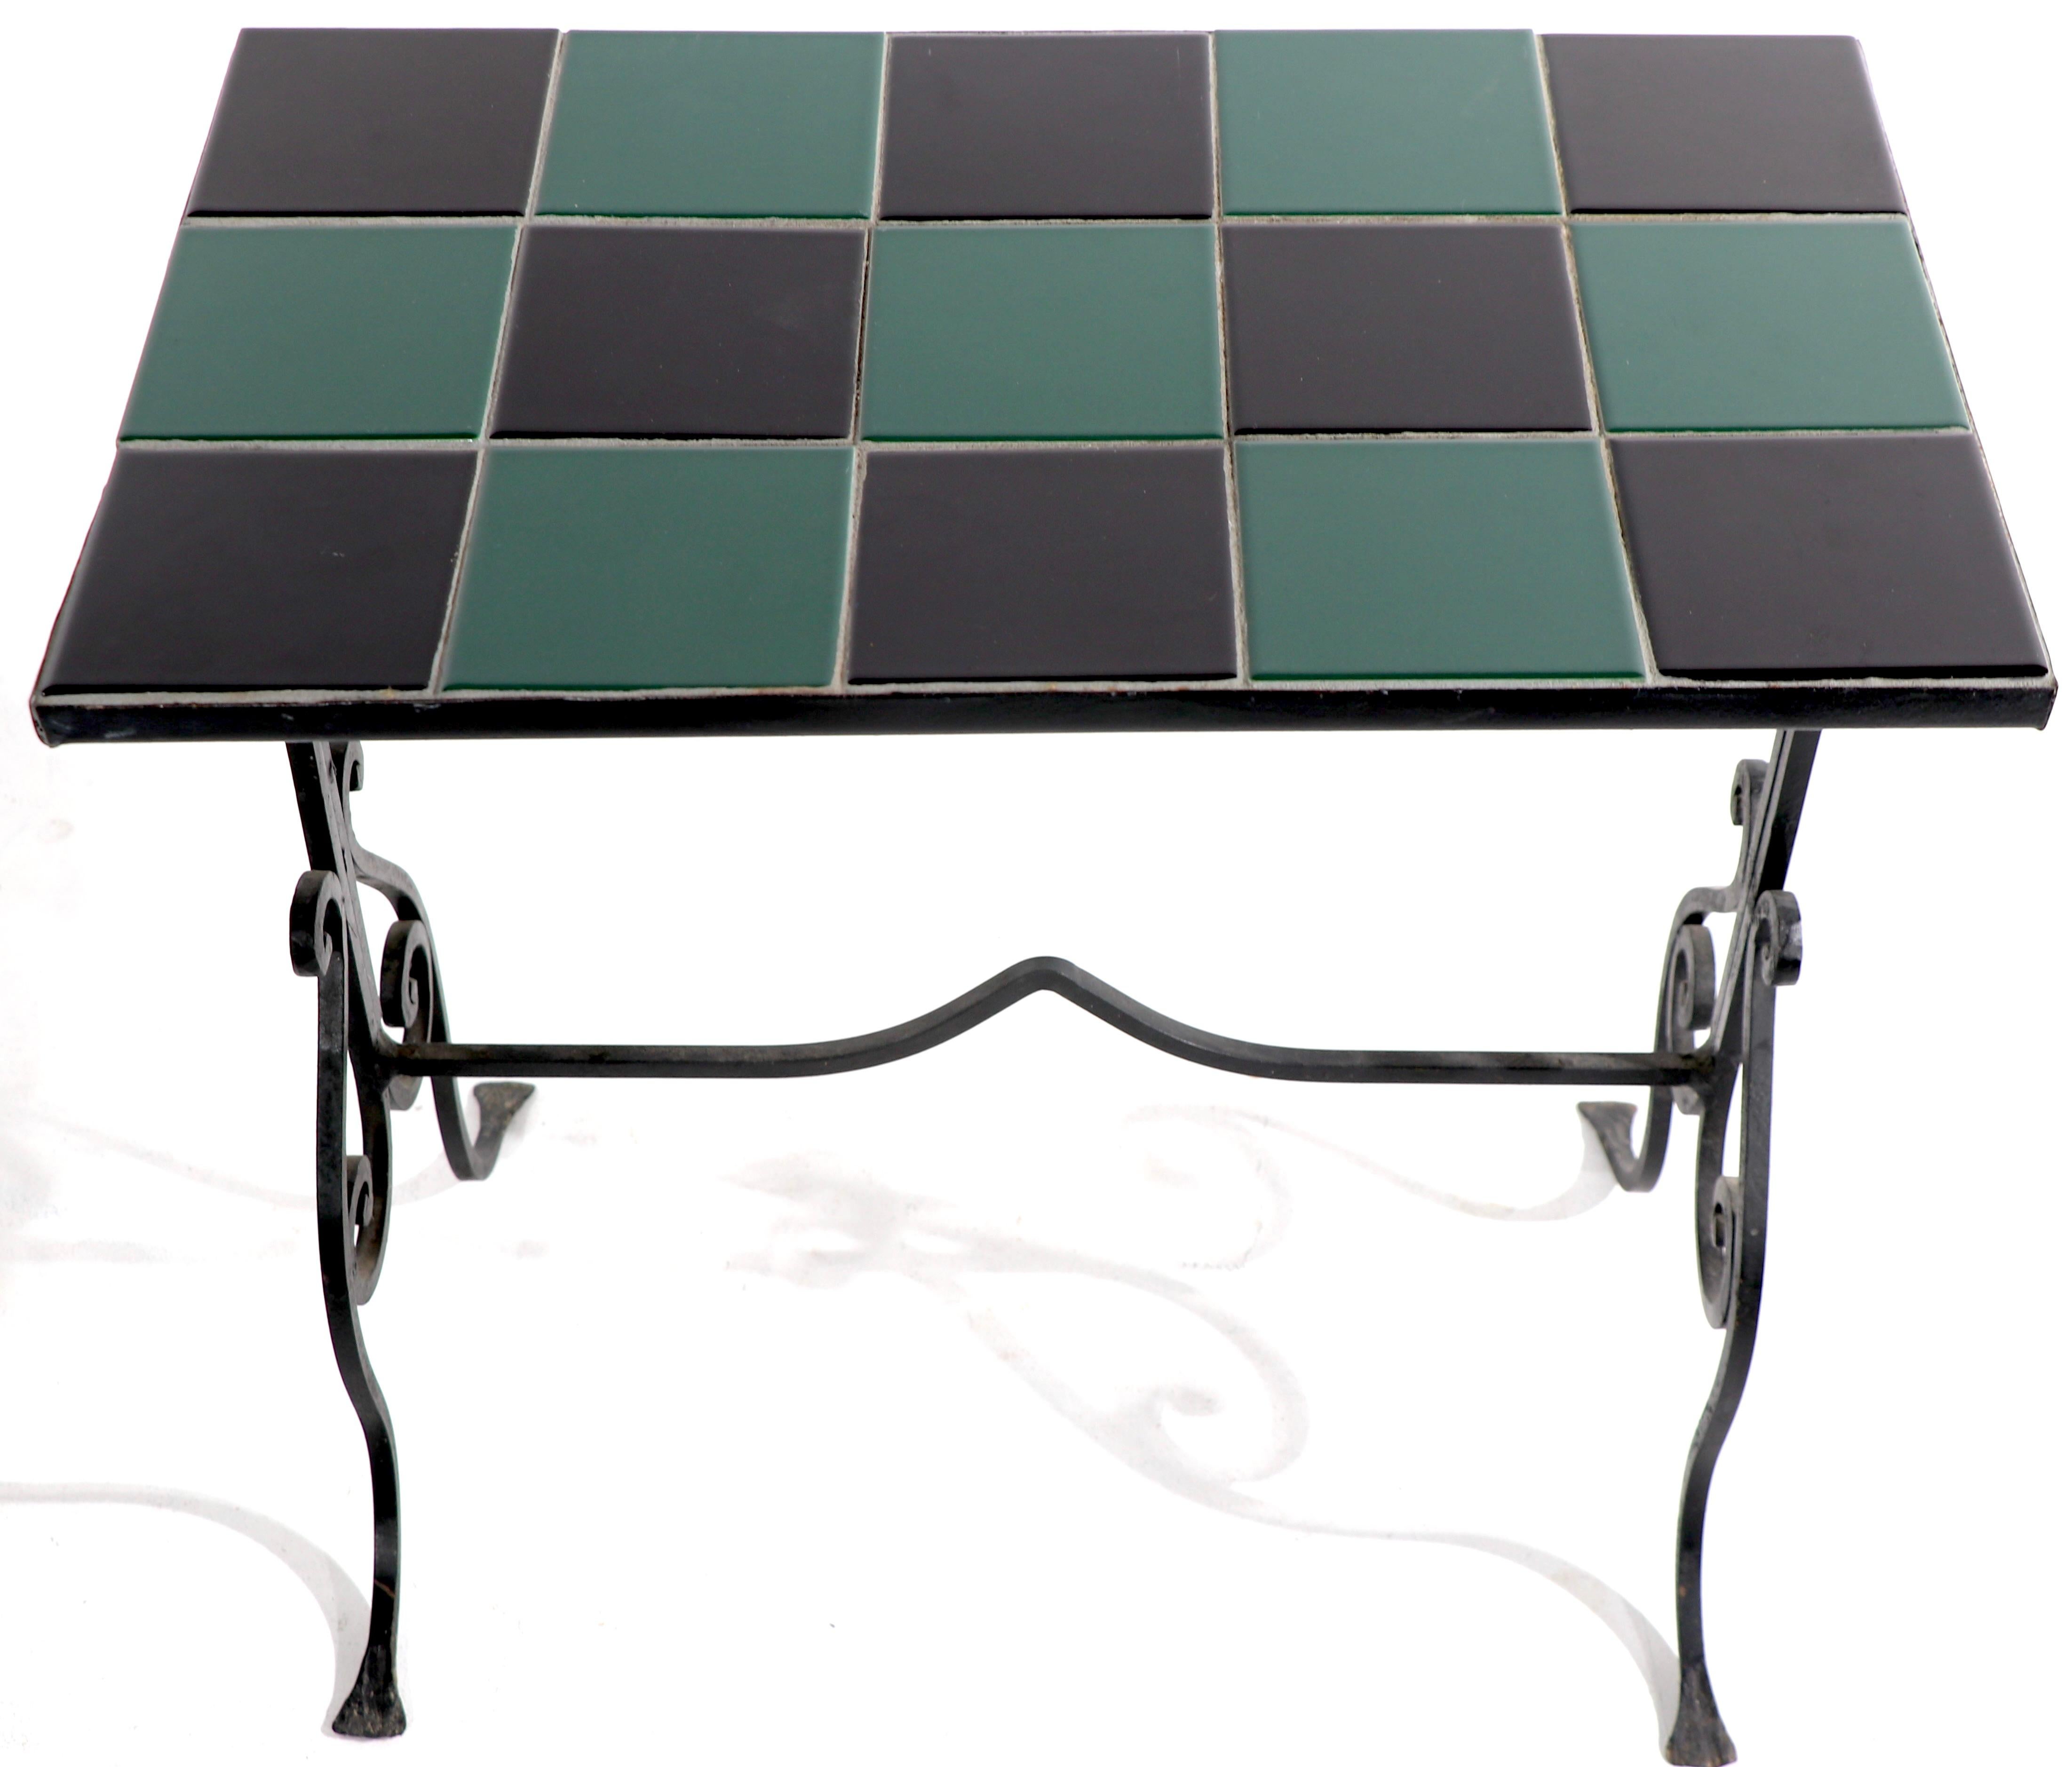 American Wrought Iron Tile Top Table